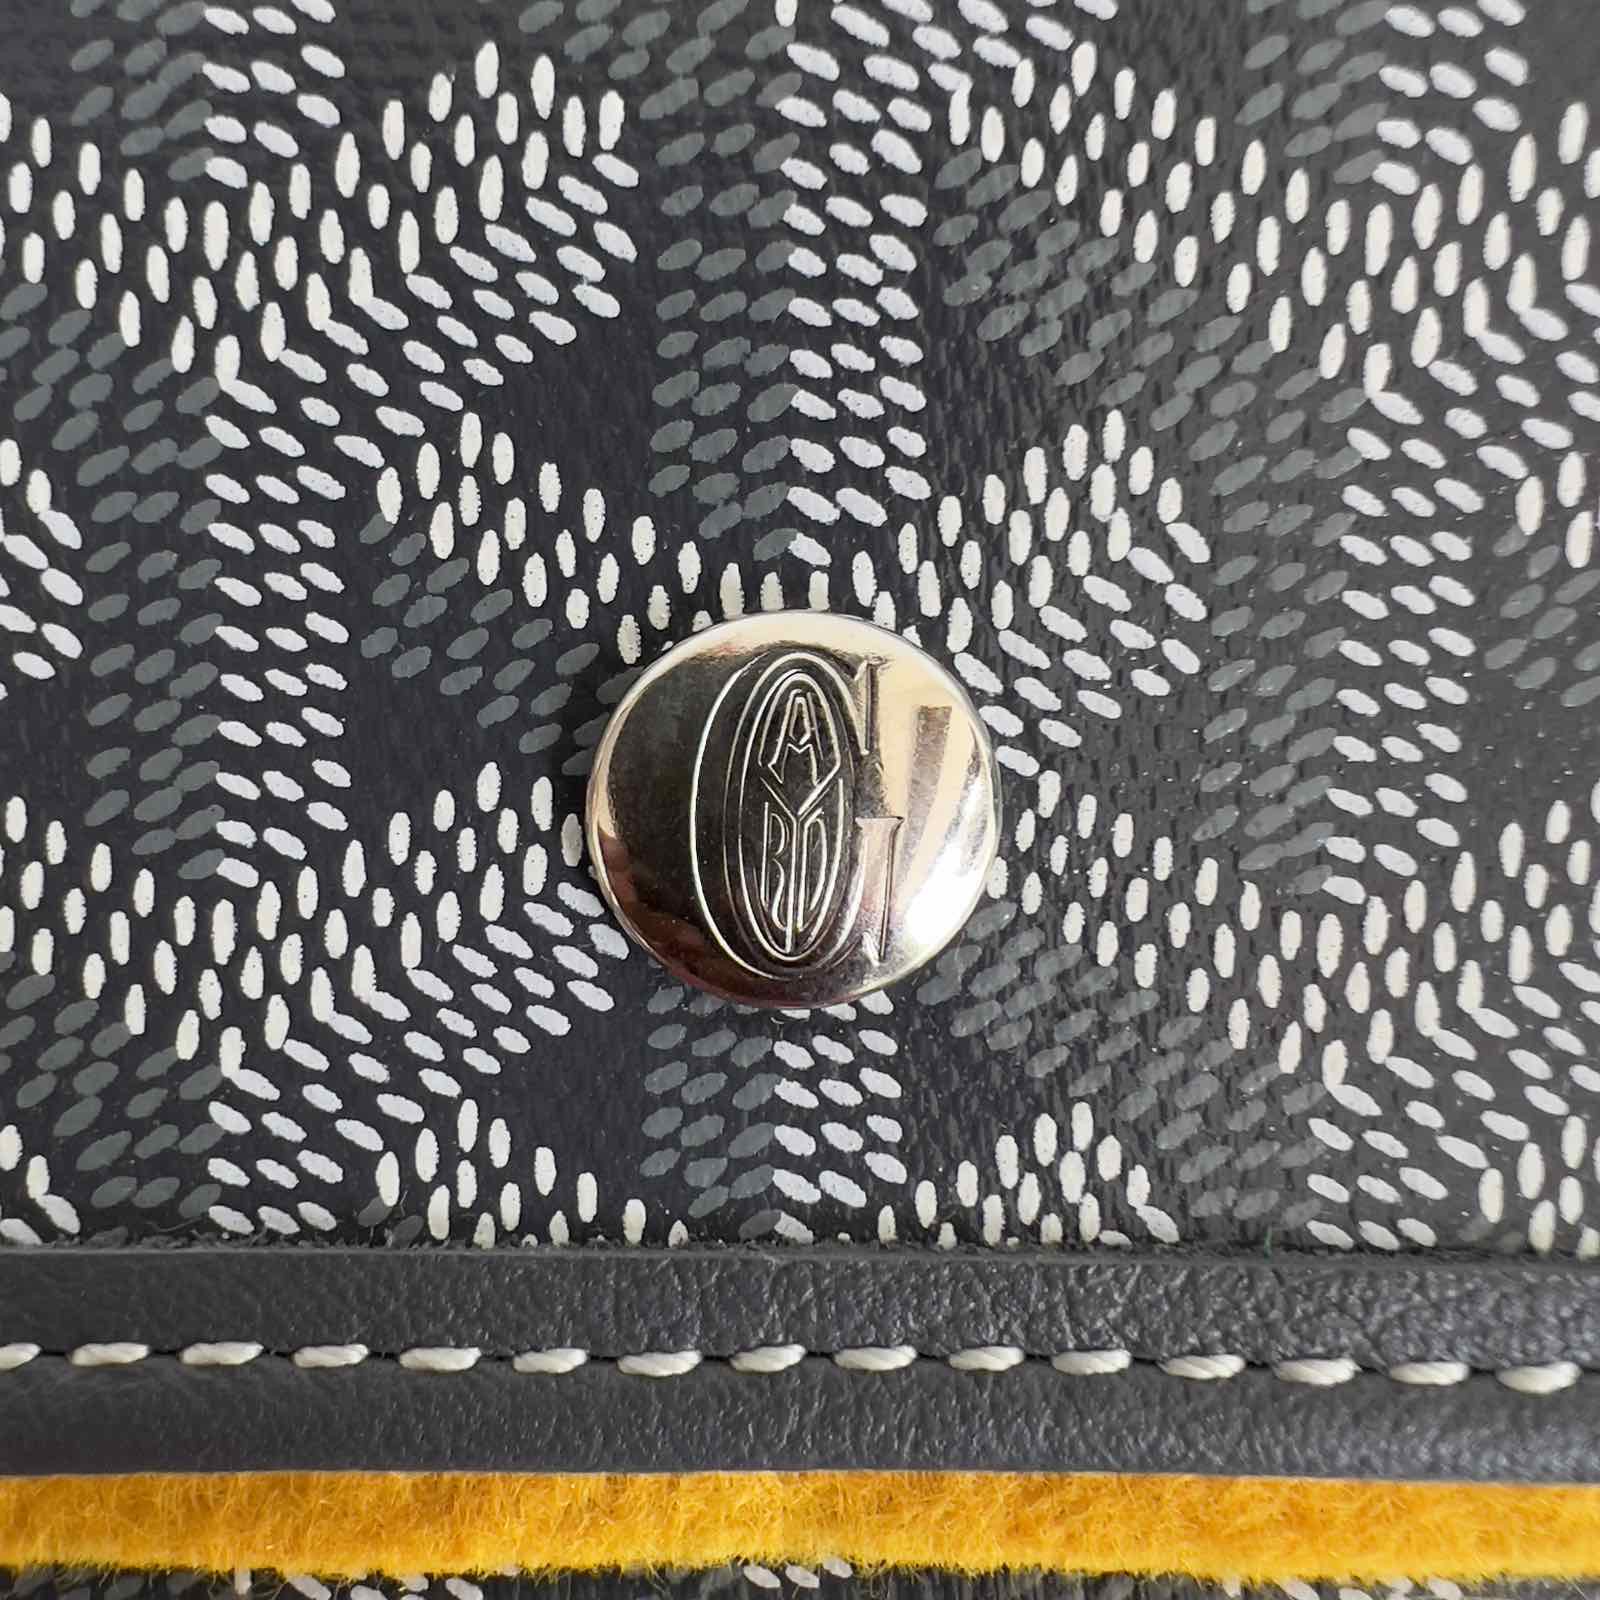 Goyard St. Louis Black/Tan PM. Made in France. With care card, pouch &  dustbag ❤️